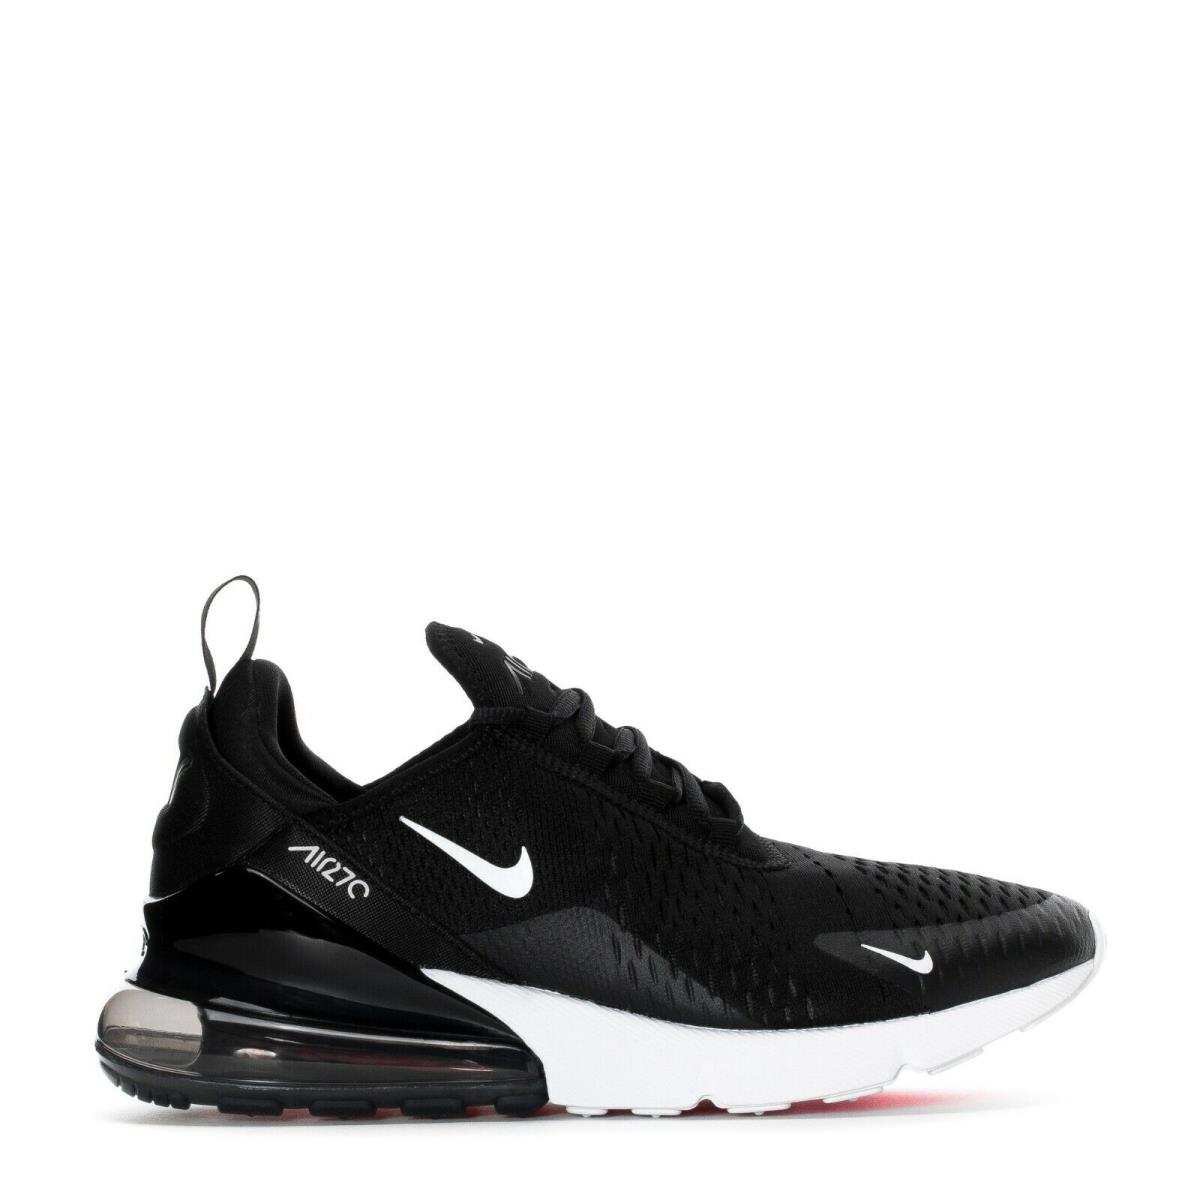 Mens Nike Air Max 270 AH8050-002 Black Anthracite White Solar Red Shoes